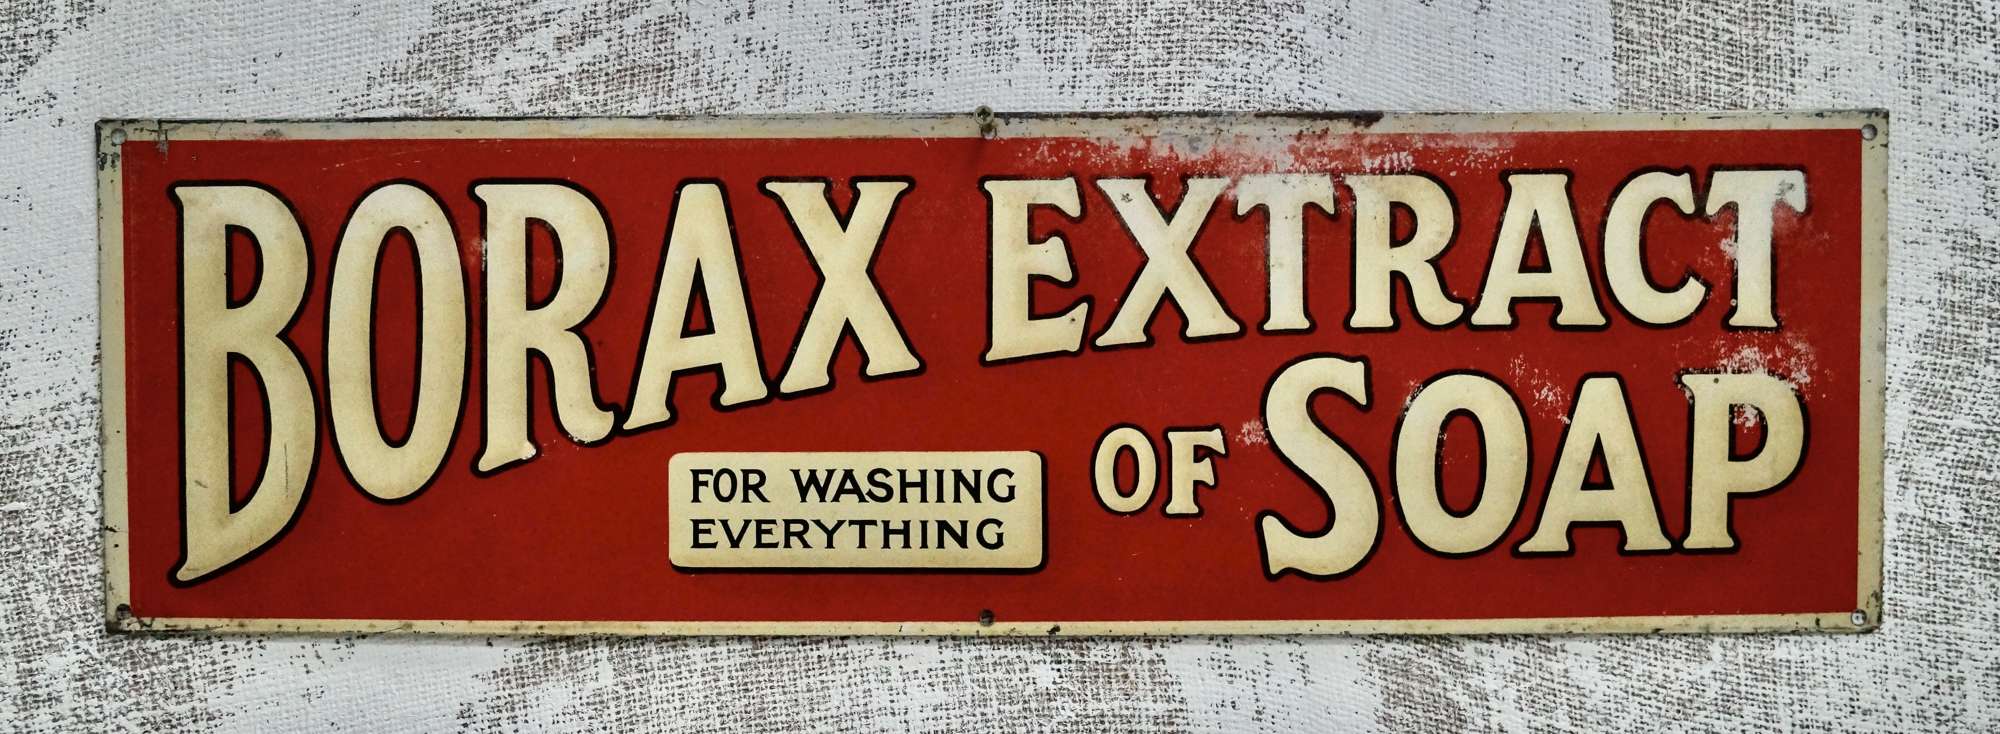 Vintage Borax Extract Of Soap Advertising Sign